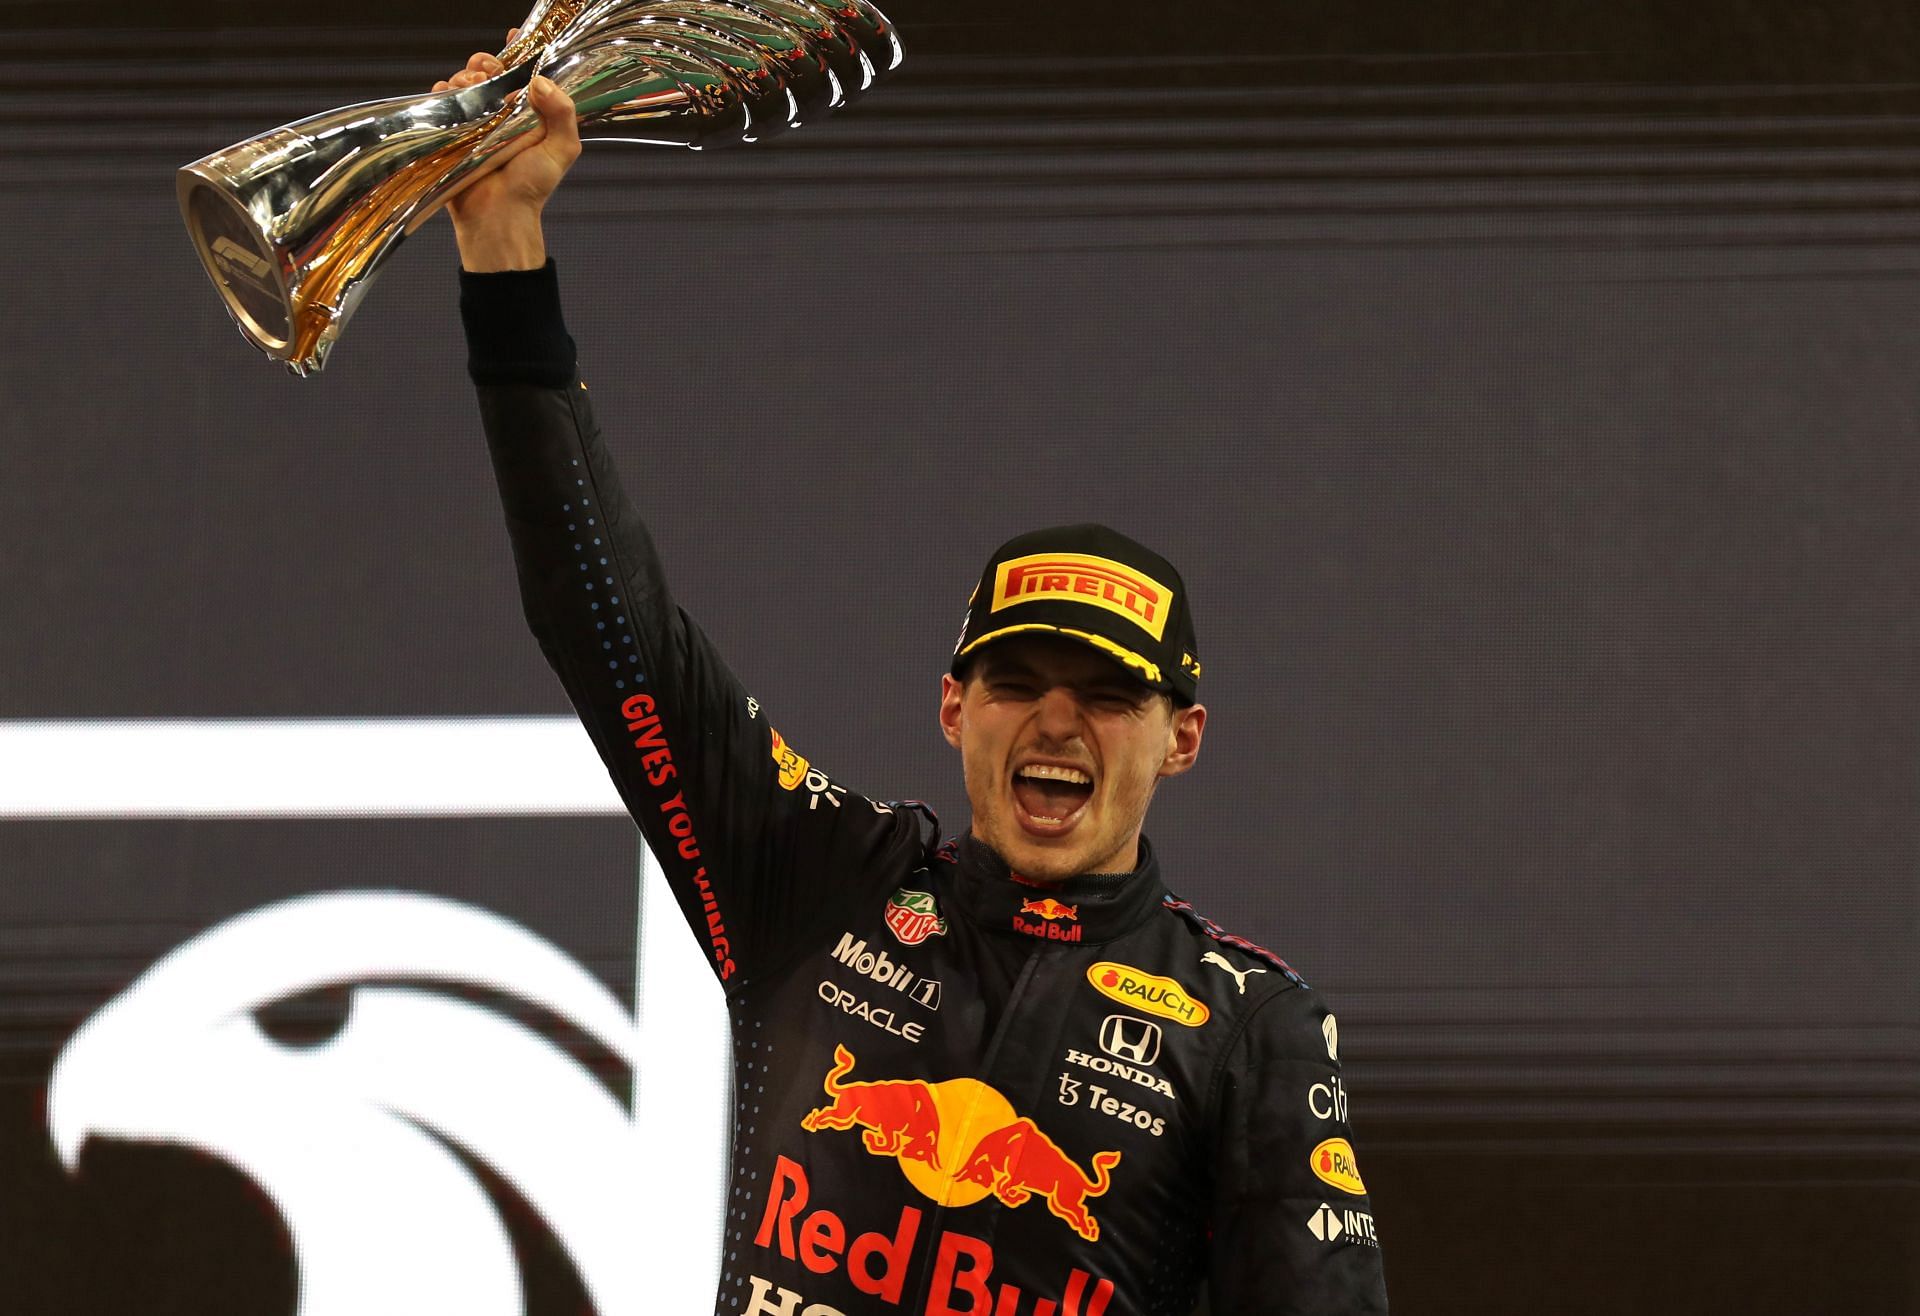 F1 Grand Prix of Abu Dhabi - Max Verstappen wins his maiden title in the sport.